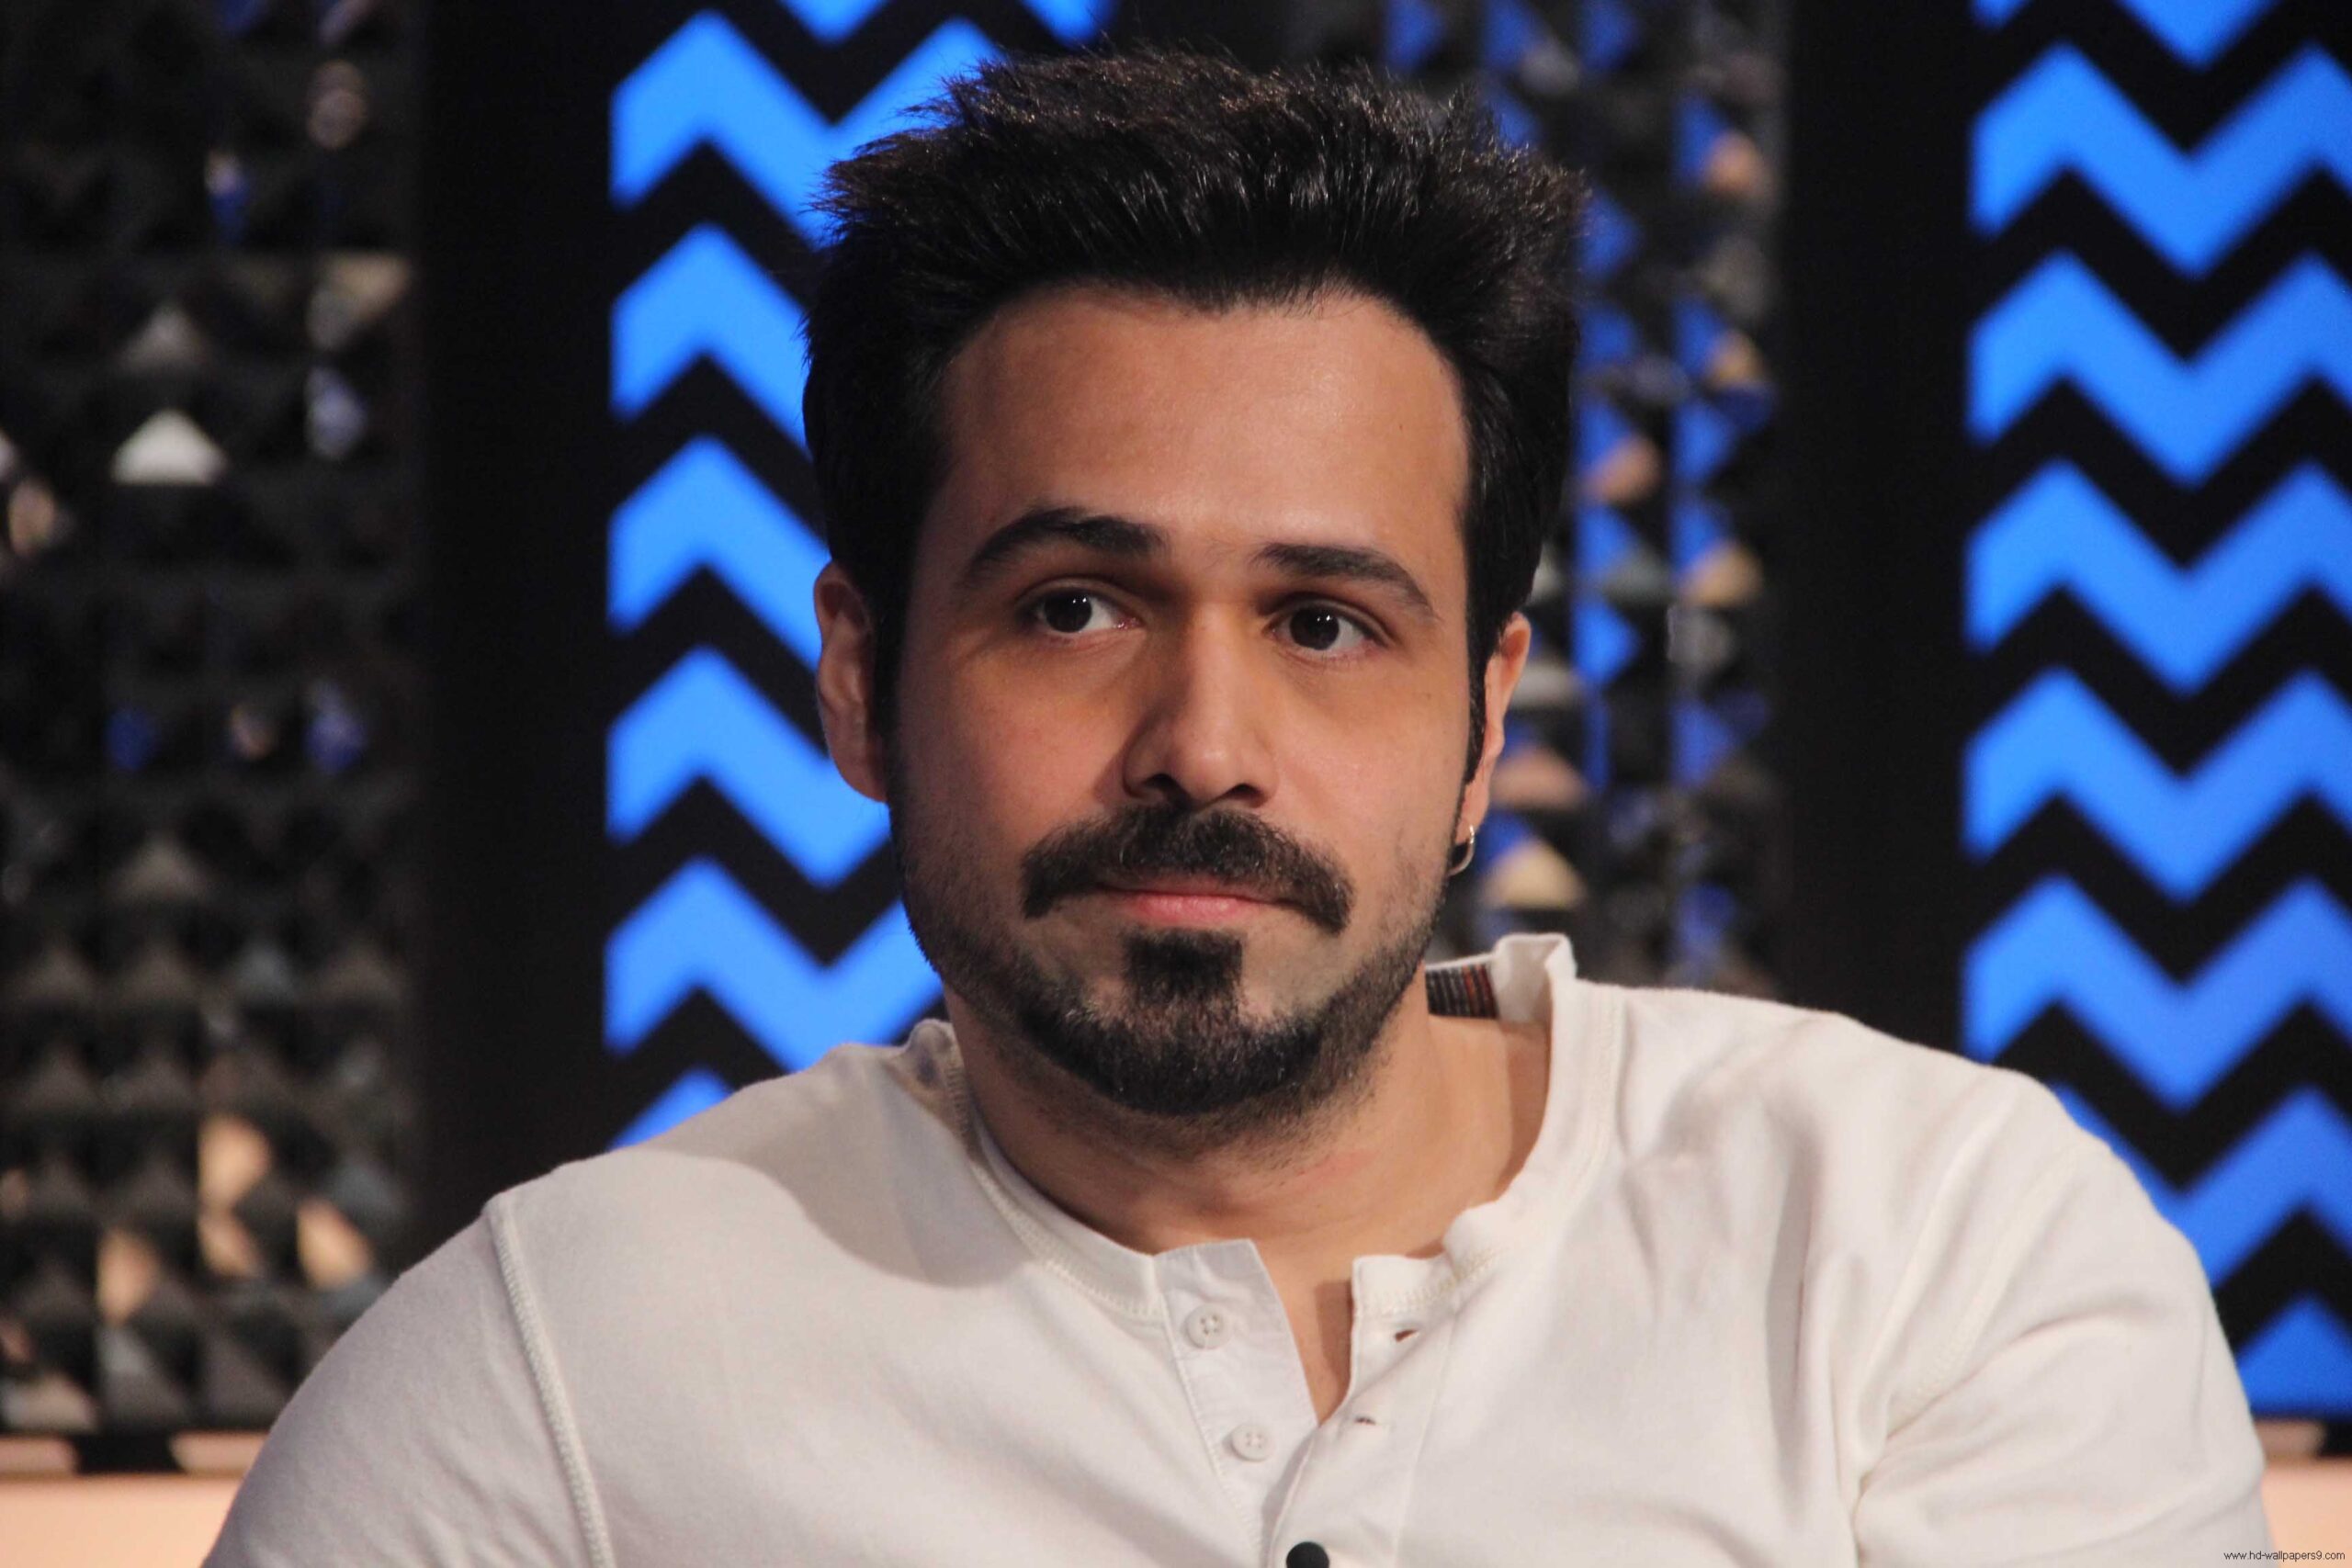 Emraan urges people to undergo early cancer detection tests